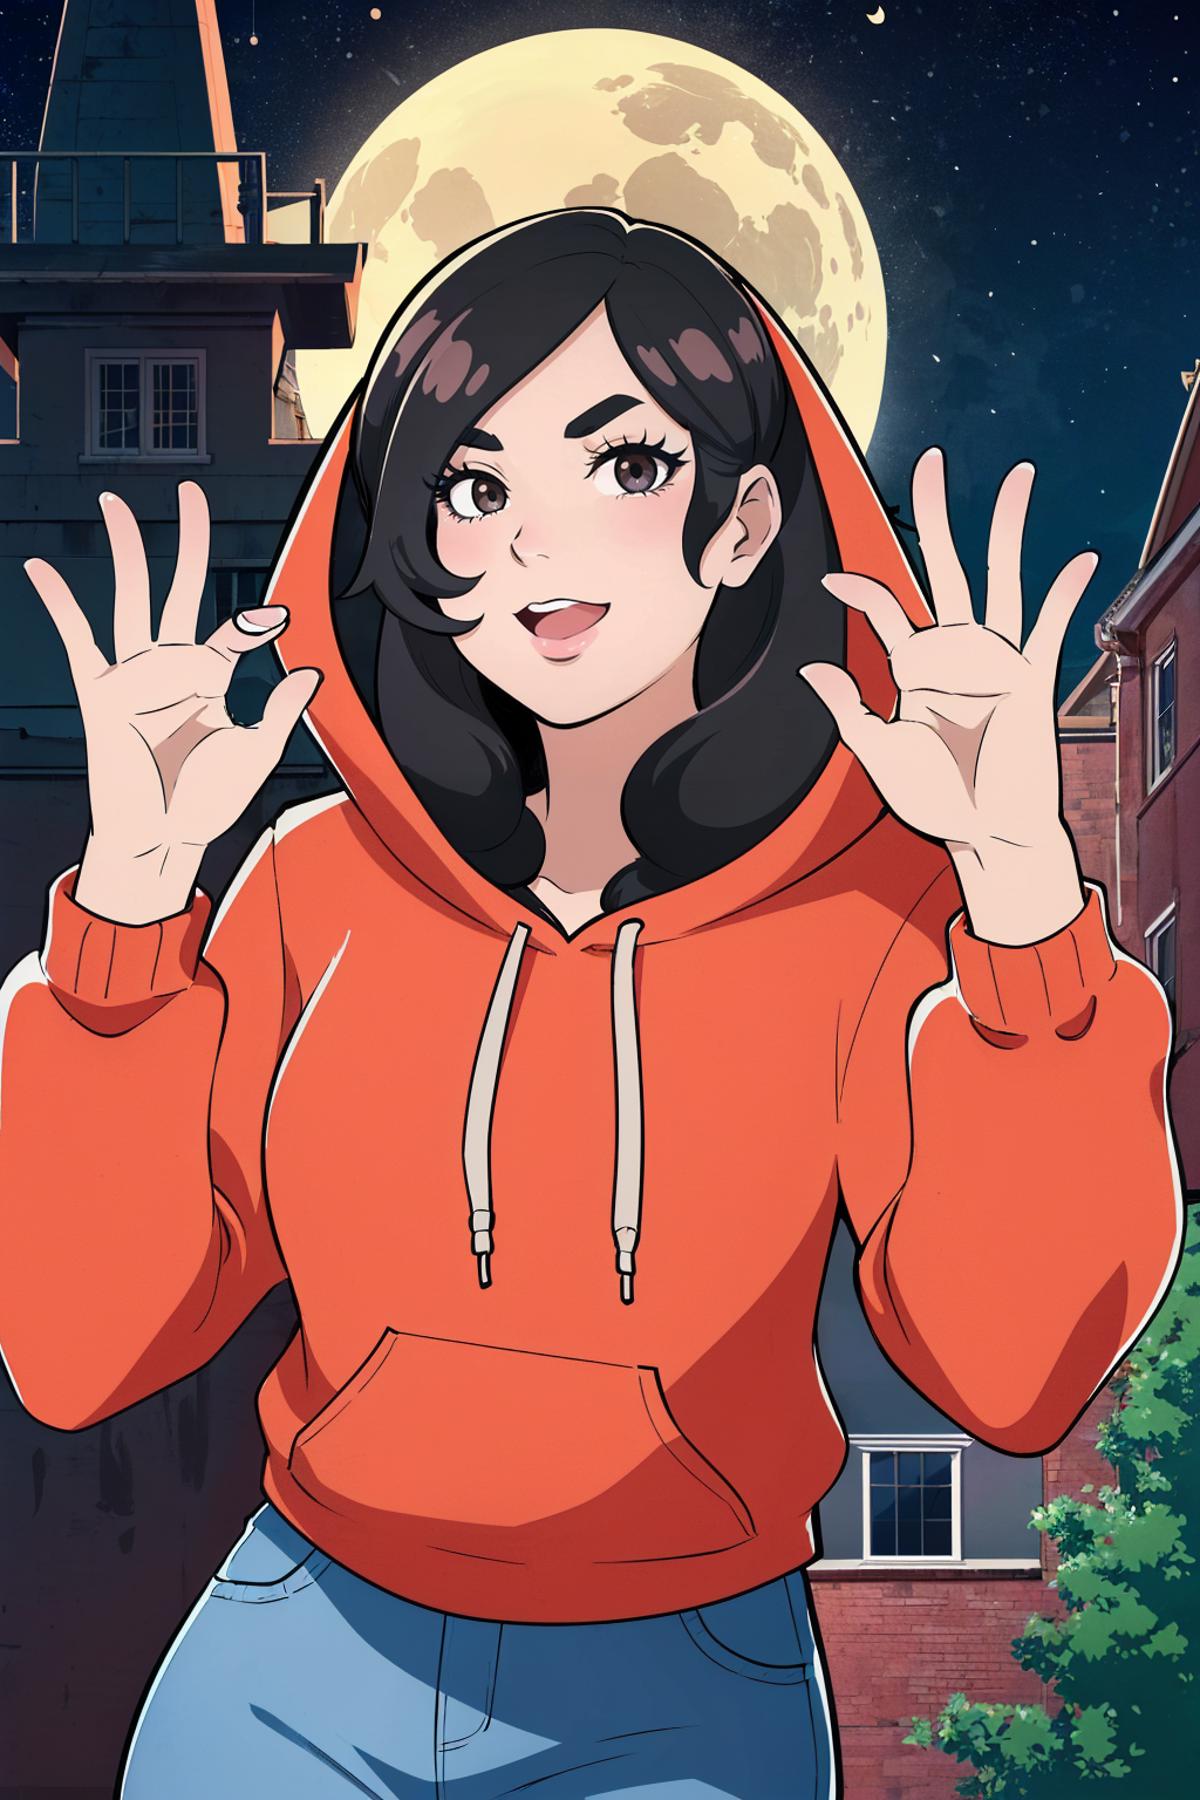 A cartoon character wearing an orange hoodie and holding up 10 fingers.